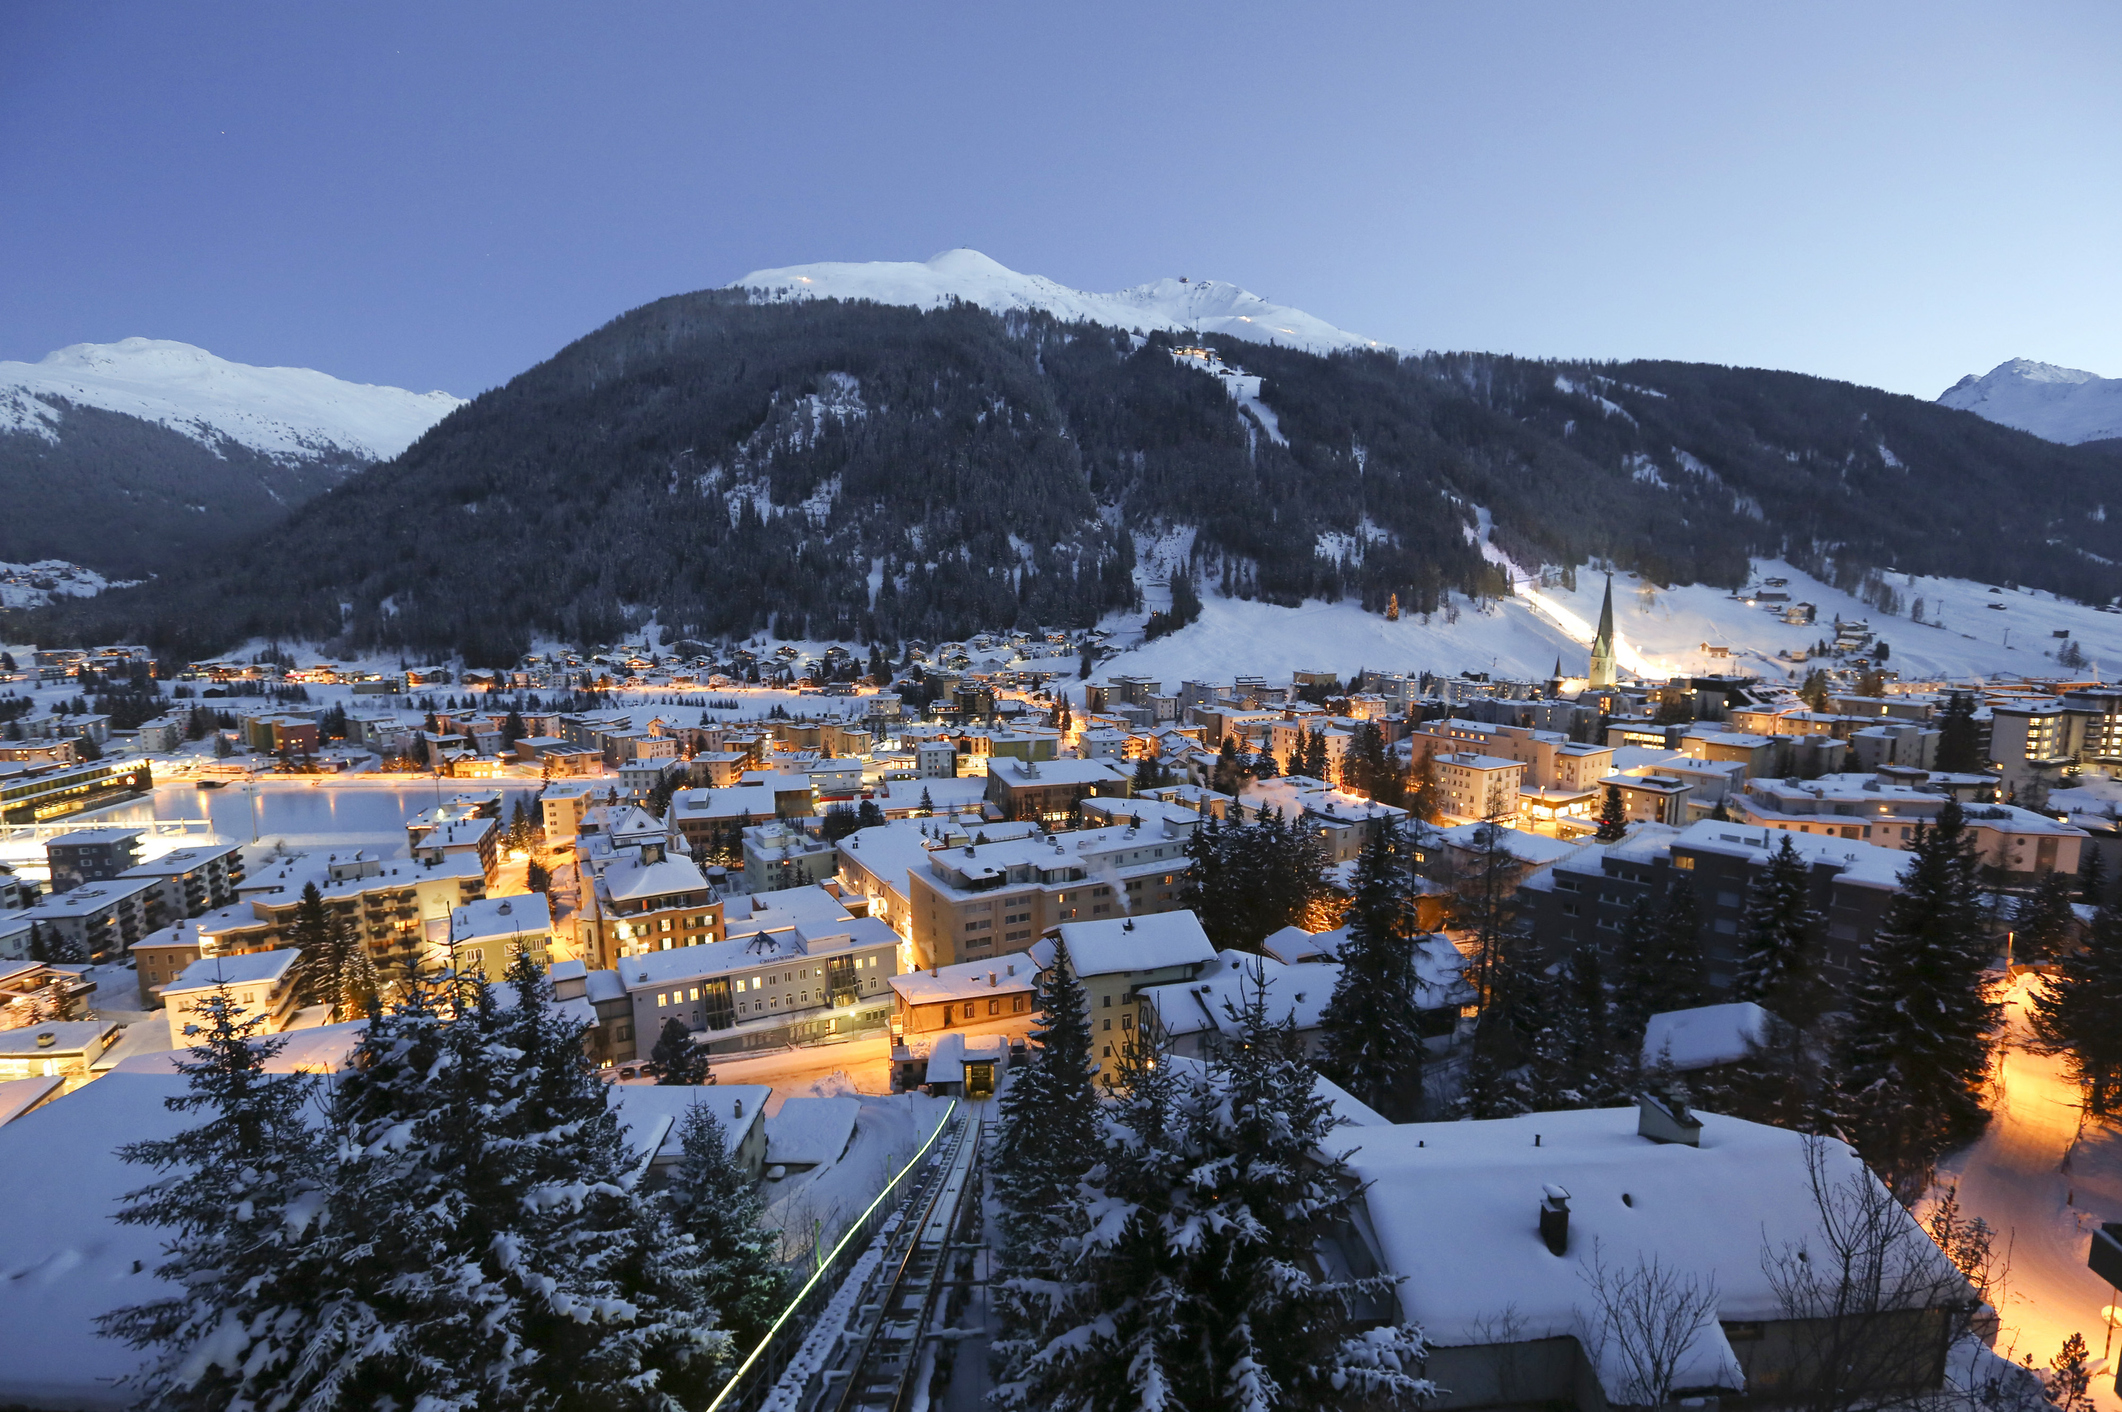 Snow covered buildings from the Schatzalp area above the town of Davos, Switzerland. Photographer: Chris Ratcliffe/Bloomberg